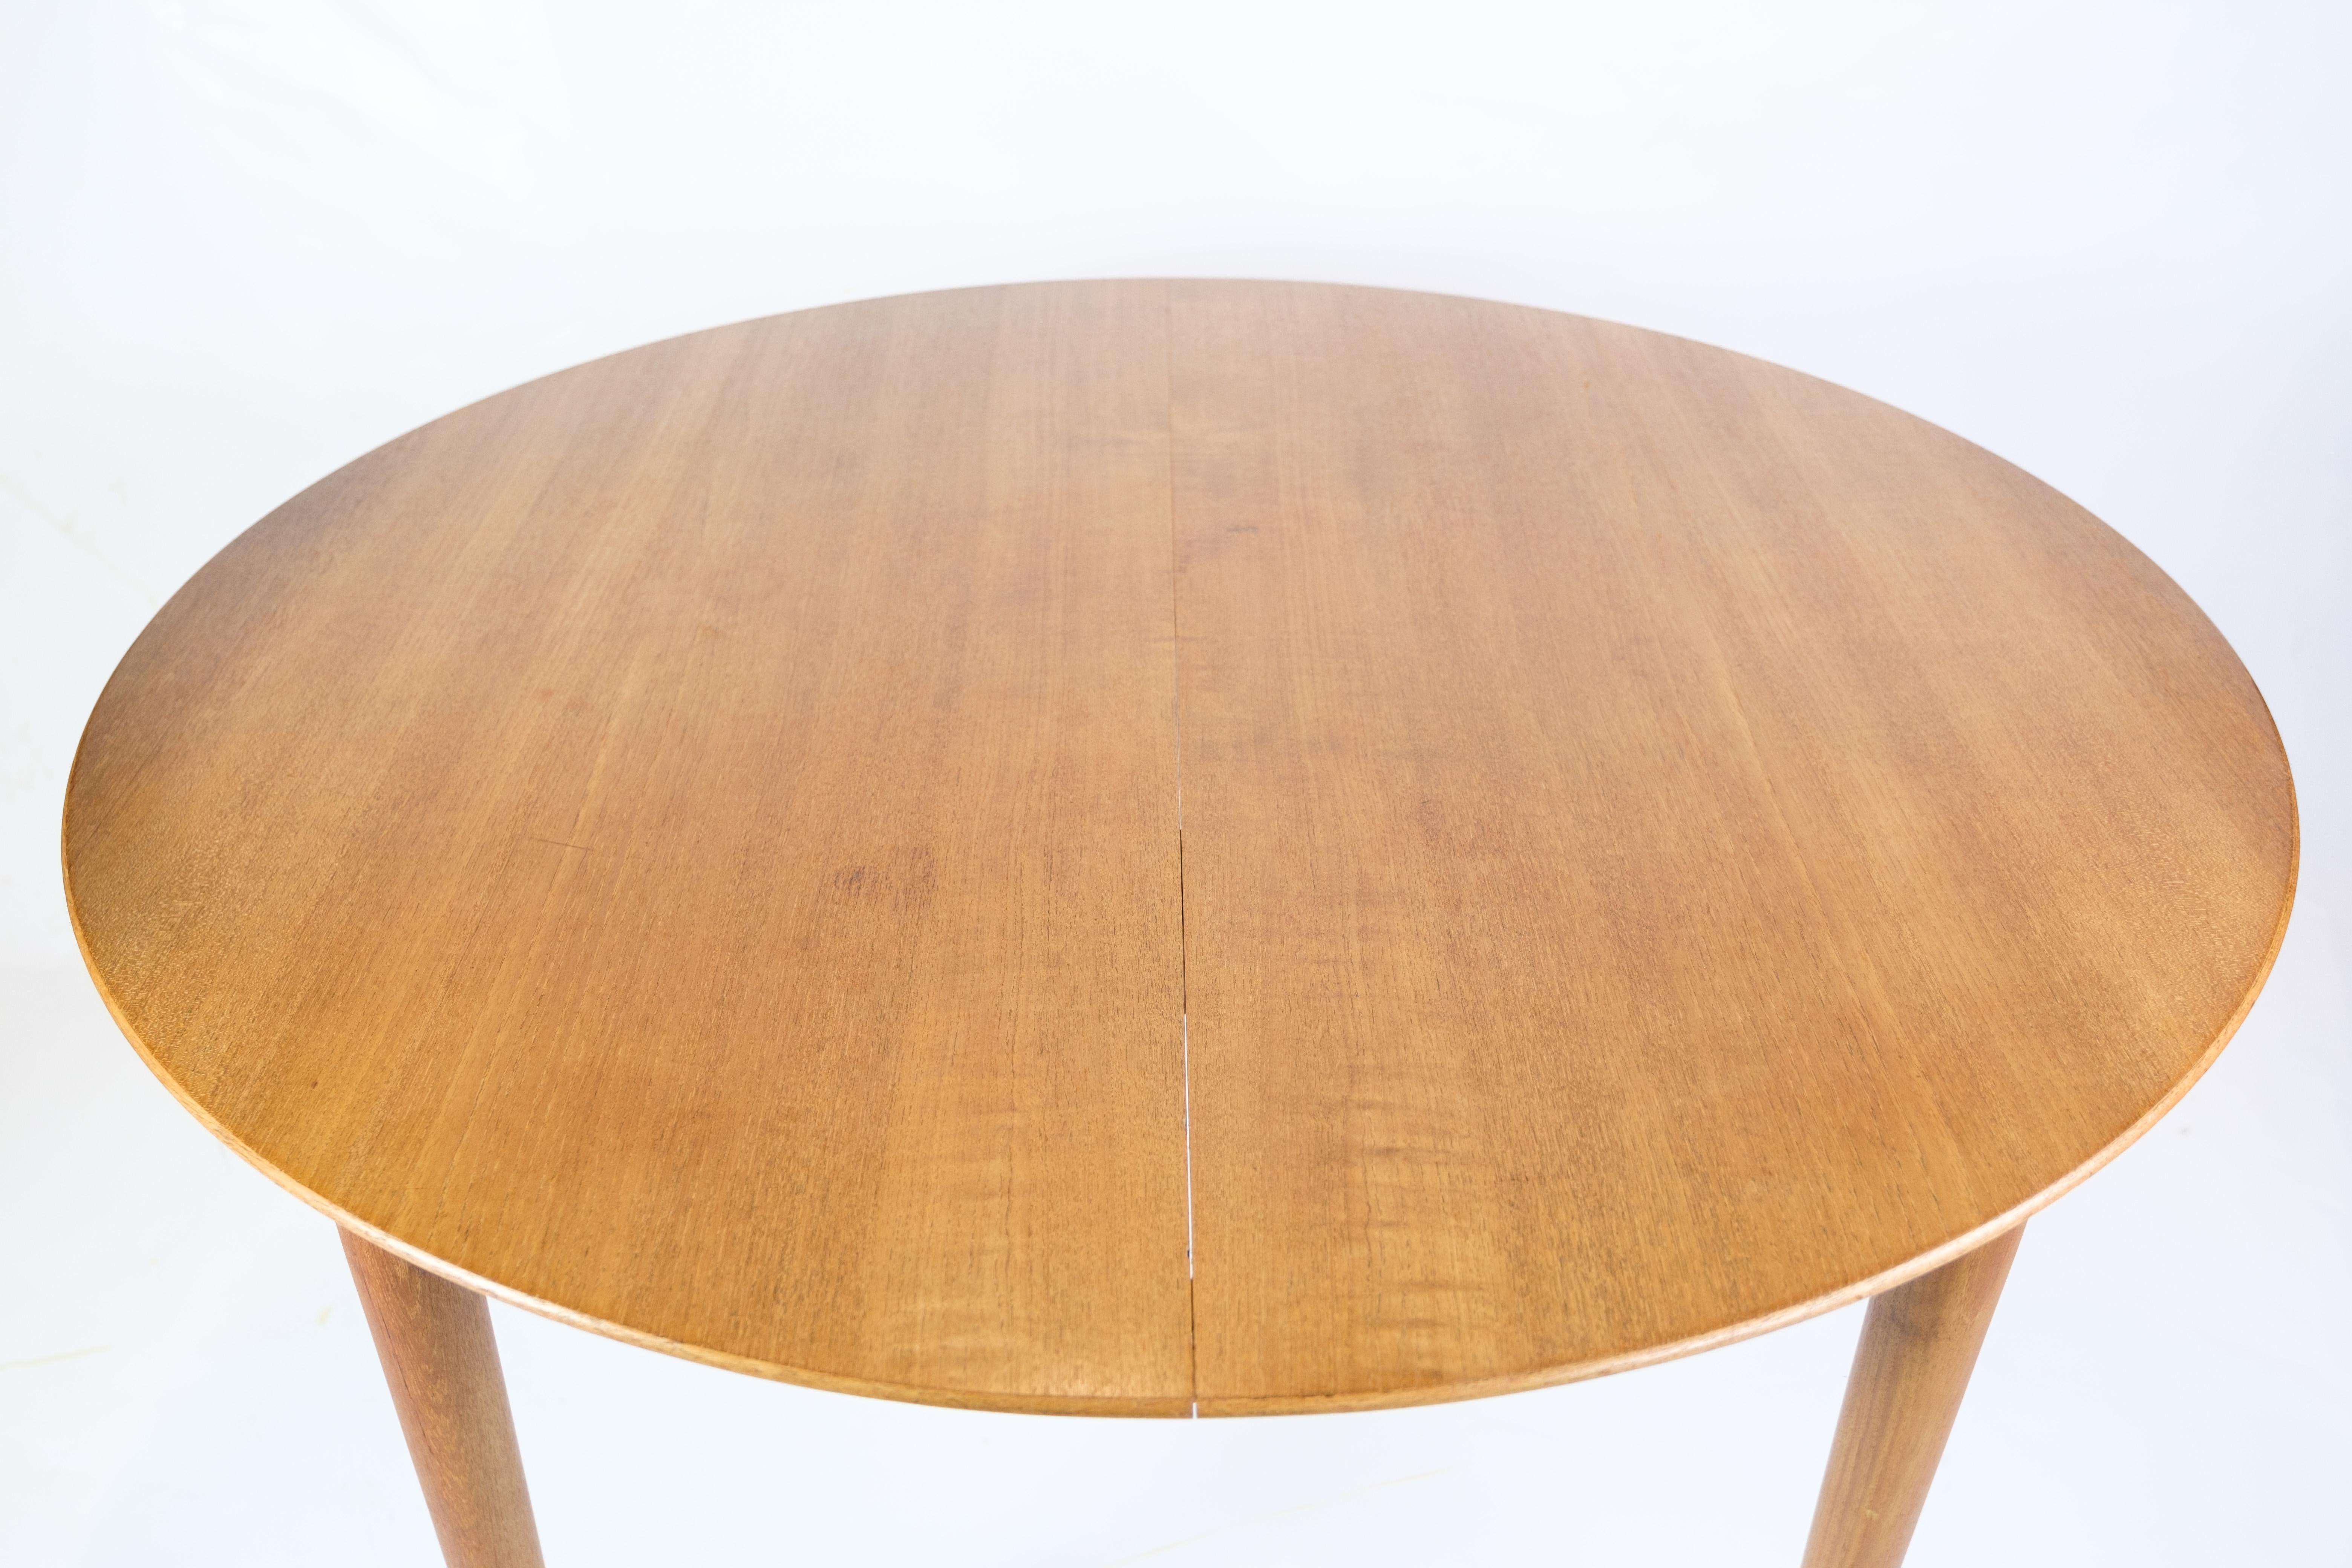 This round teak dining table from the 1960s is a beautiful example of Danish furniture design and craftsmanship at its best. Created by the renowned designer Arne Vodder in collaboration with P. Olsen Sibast I/S Møbelsnedkeri, this table combines